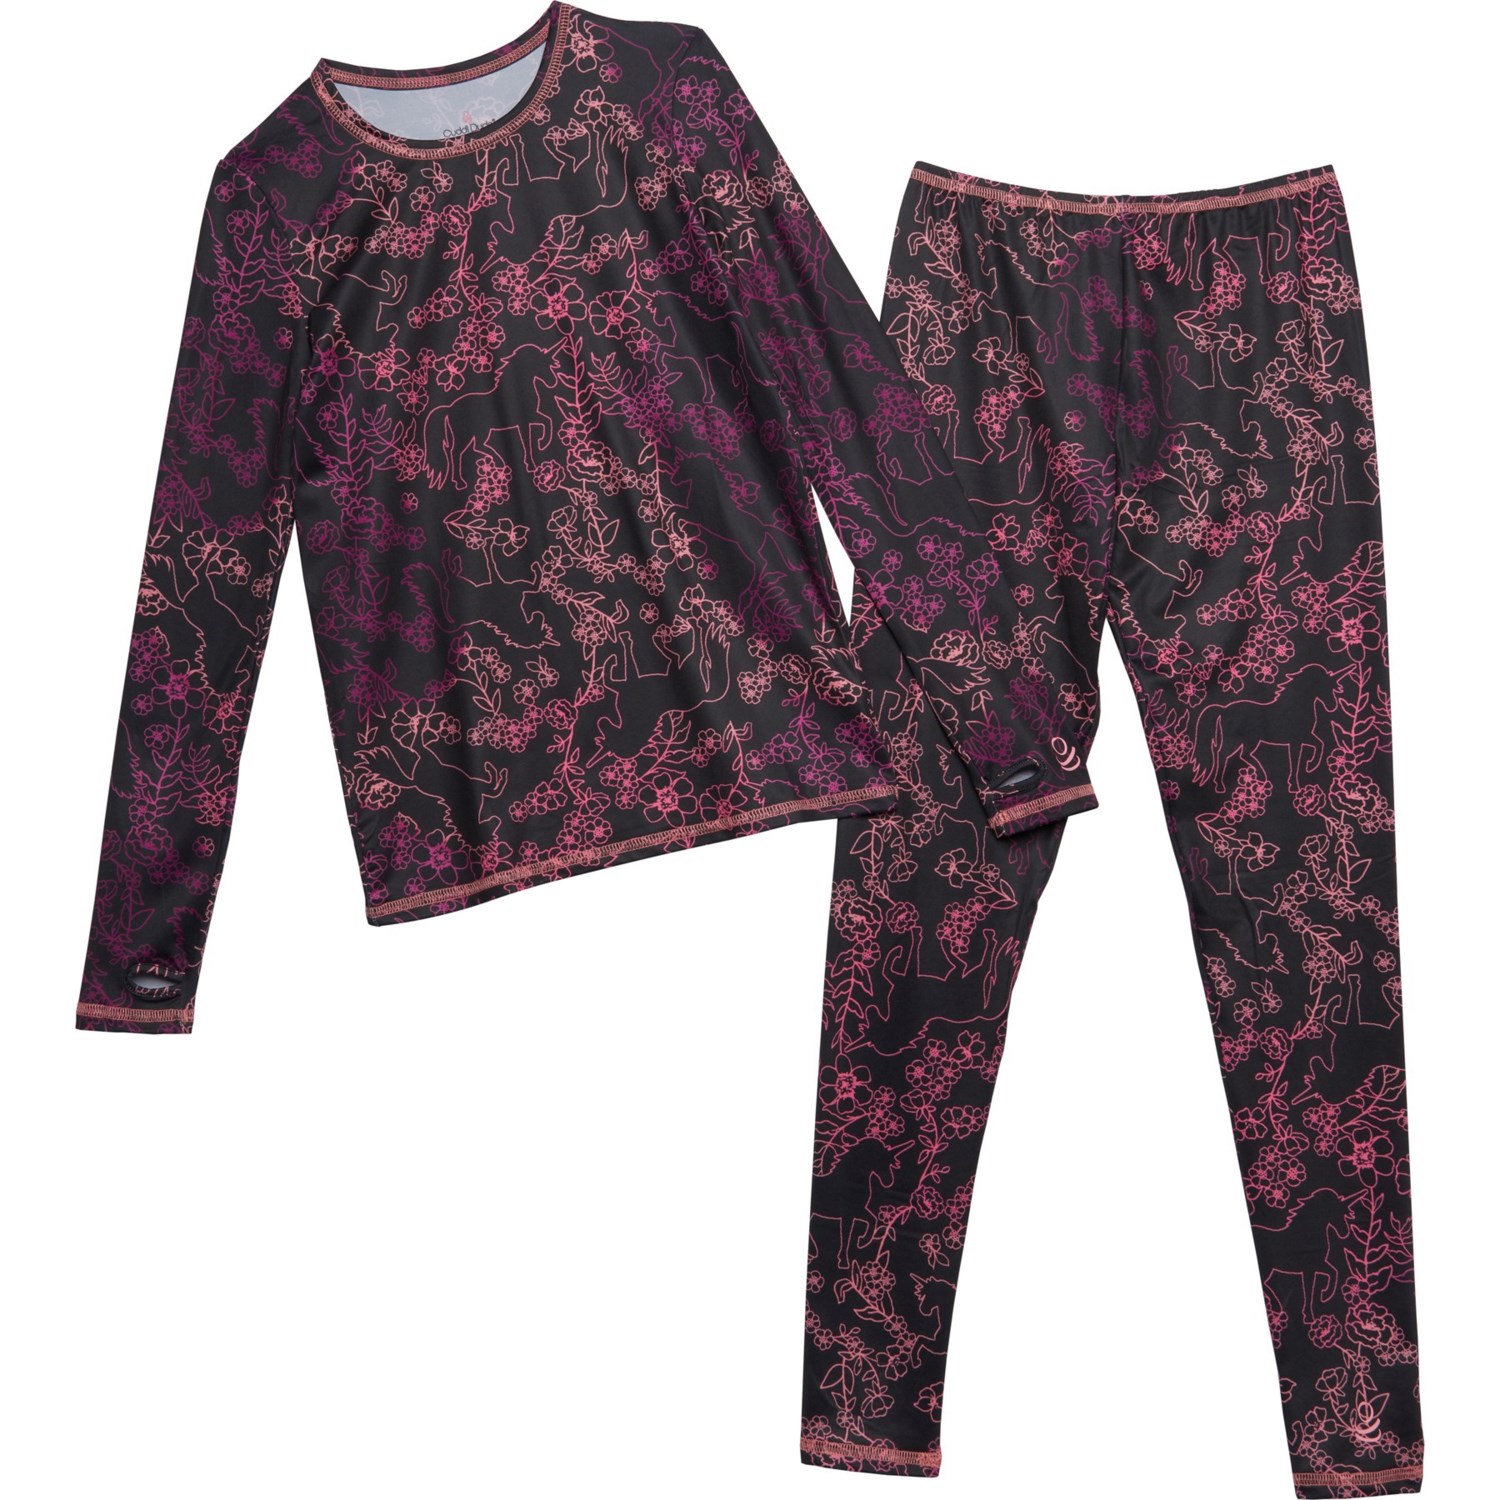 Clothing & Shoes - Bottoms - Pants - Cuddl Duds Fleece Lounge Pant - Online  Shopping for Canadians